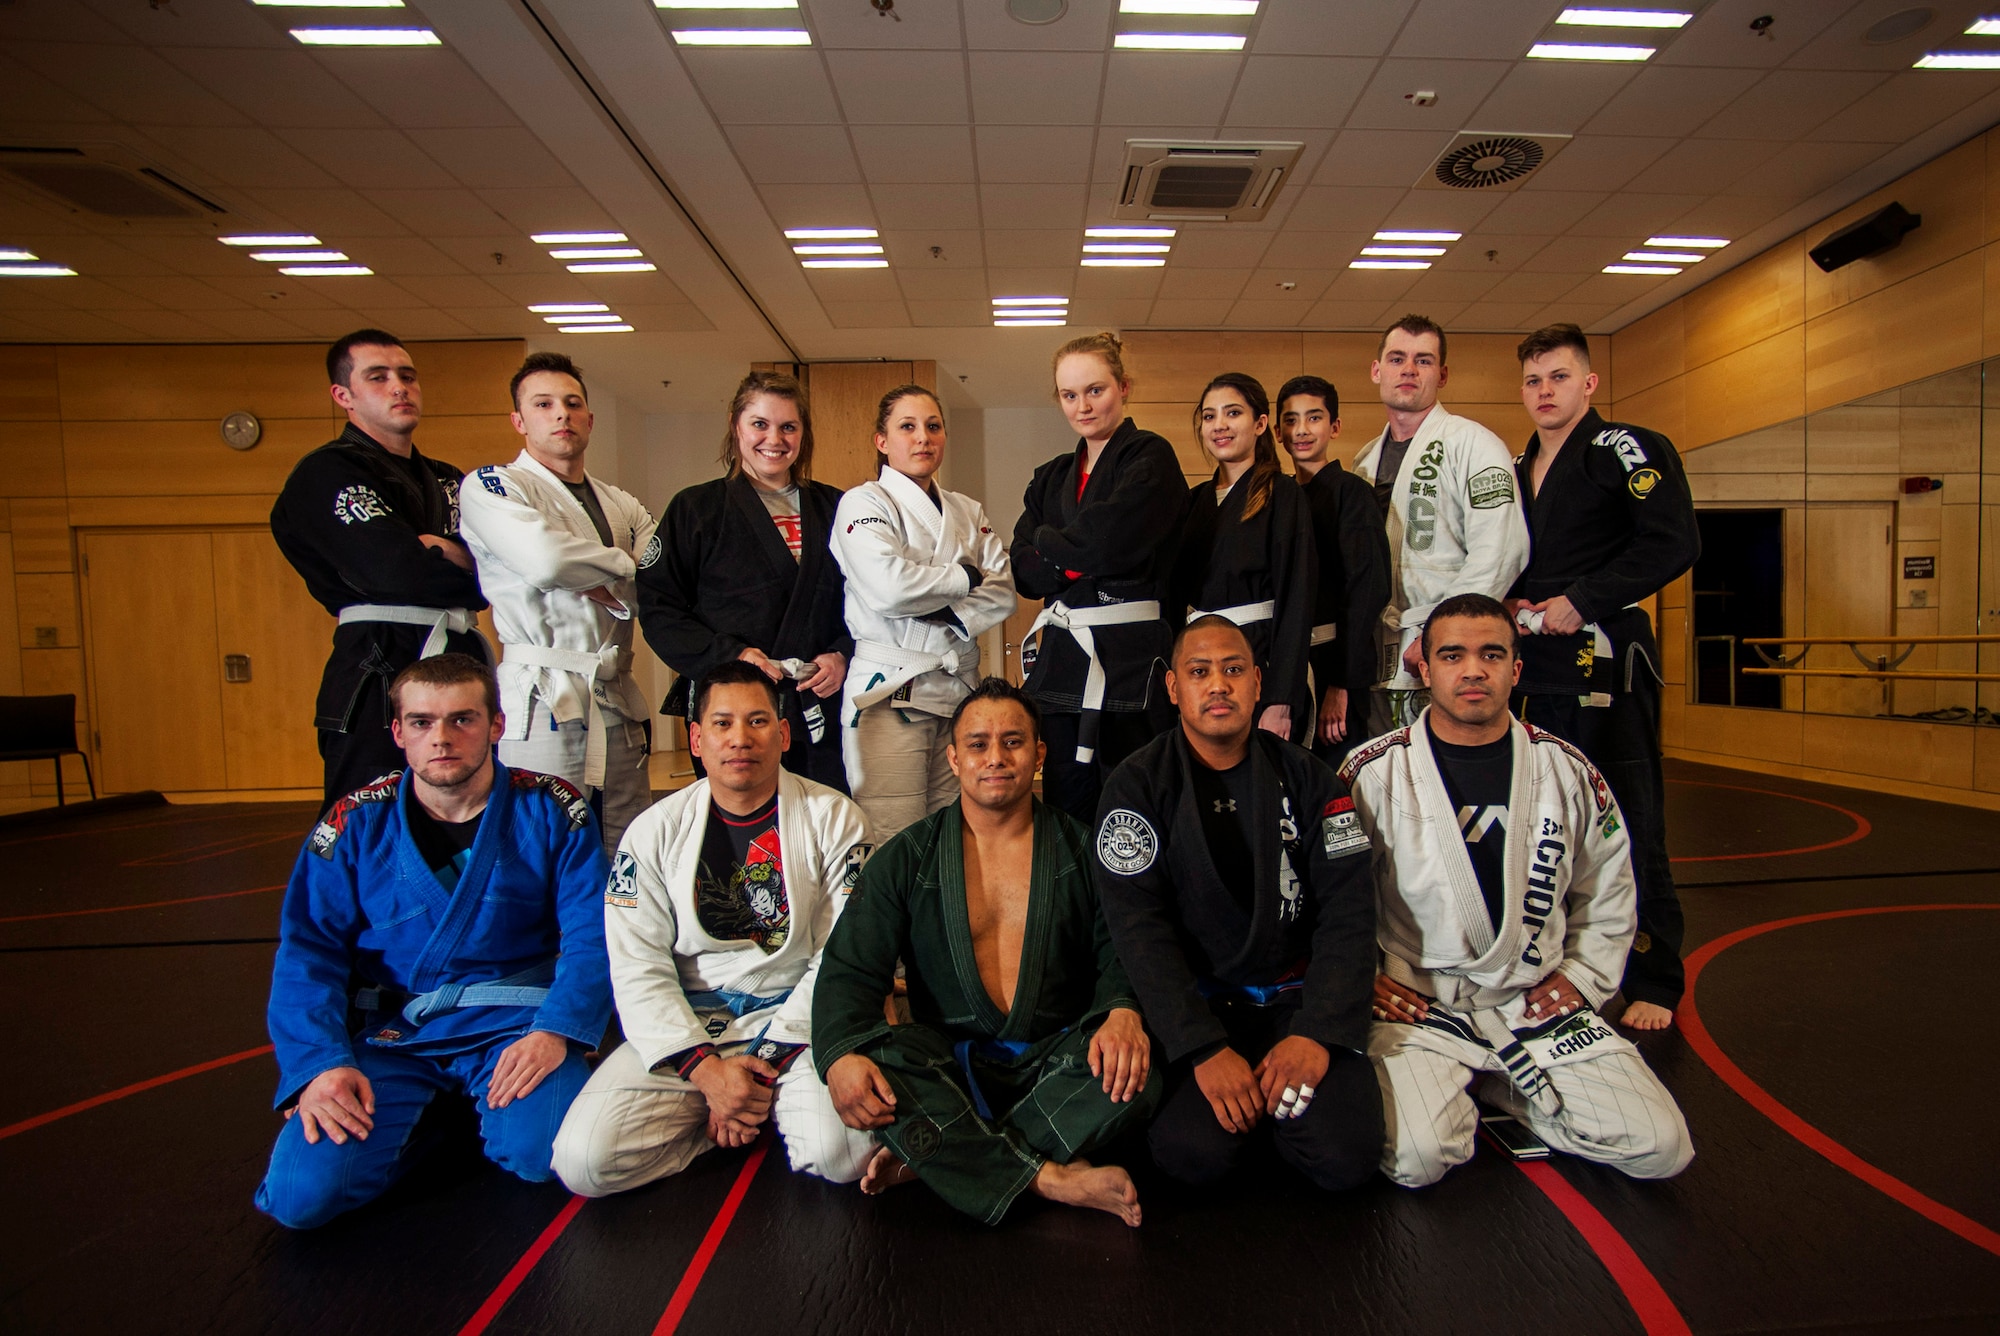 The Spangdahlem Brazilian Jiu Jitsu class poses for a group photo in the Eifel Powerhaus at Spangdahlem Air Base, Germany, March 8, 2016. The class takes place on Mondays and Tuesdays from 6:30 to 7 p.m., and is free and open to all base community members. (U.S. Air Force photo by Airman 1st Class Timothy Kim/Released) 